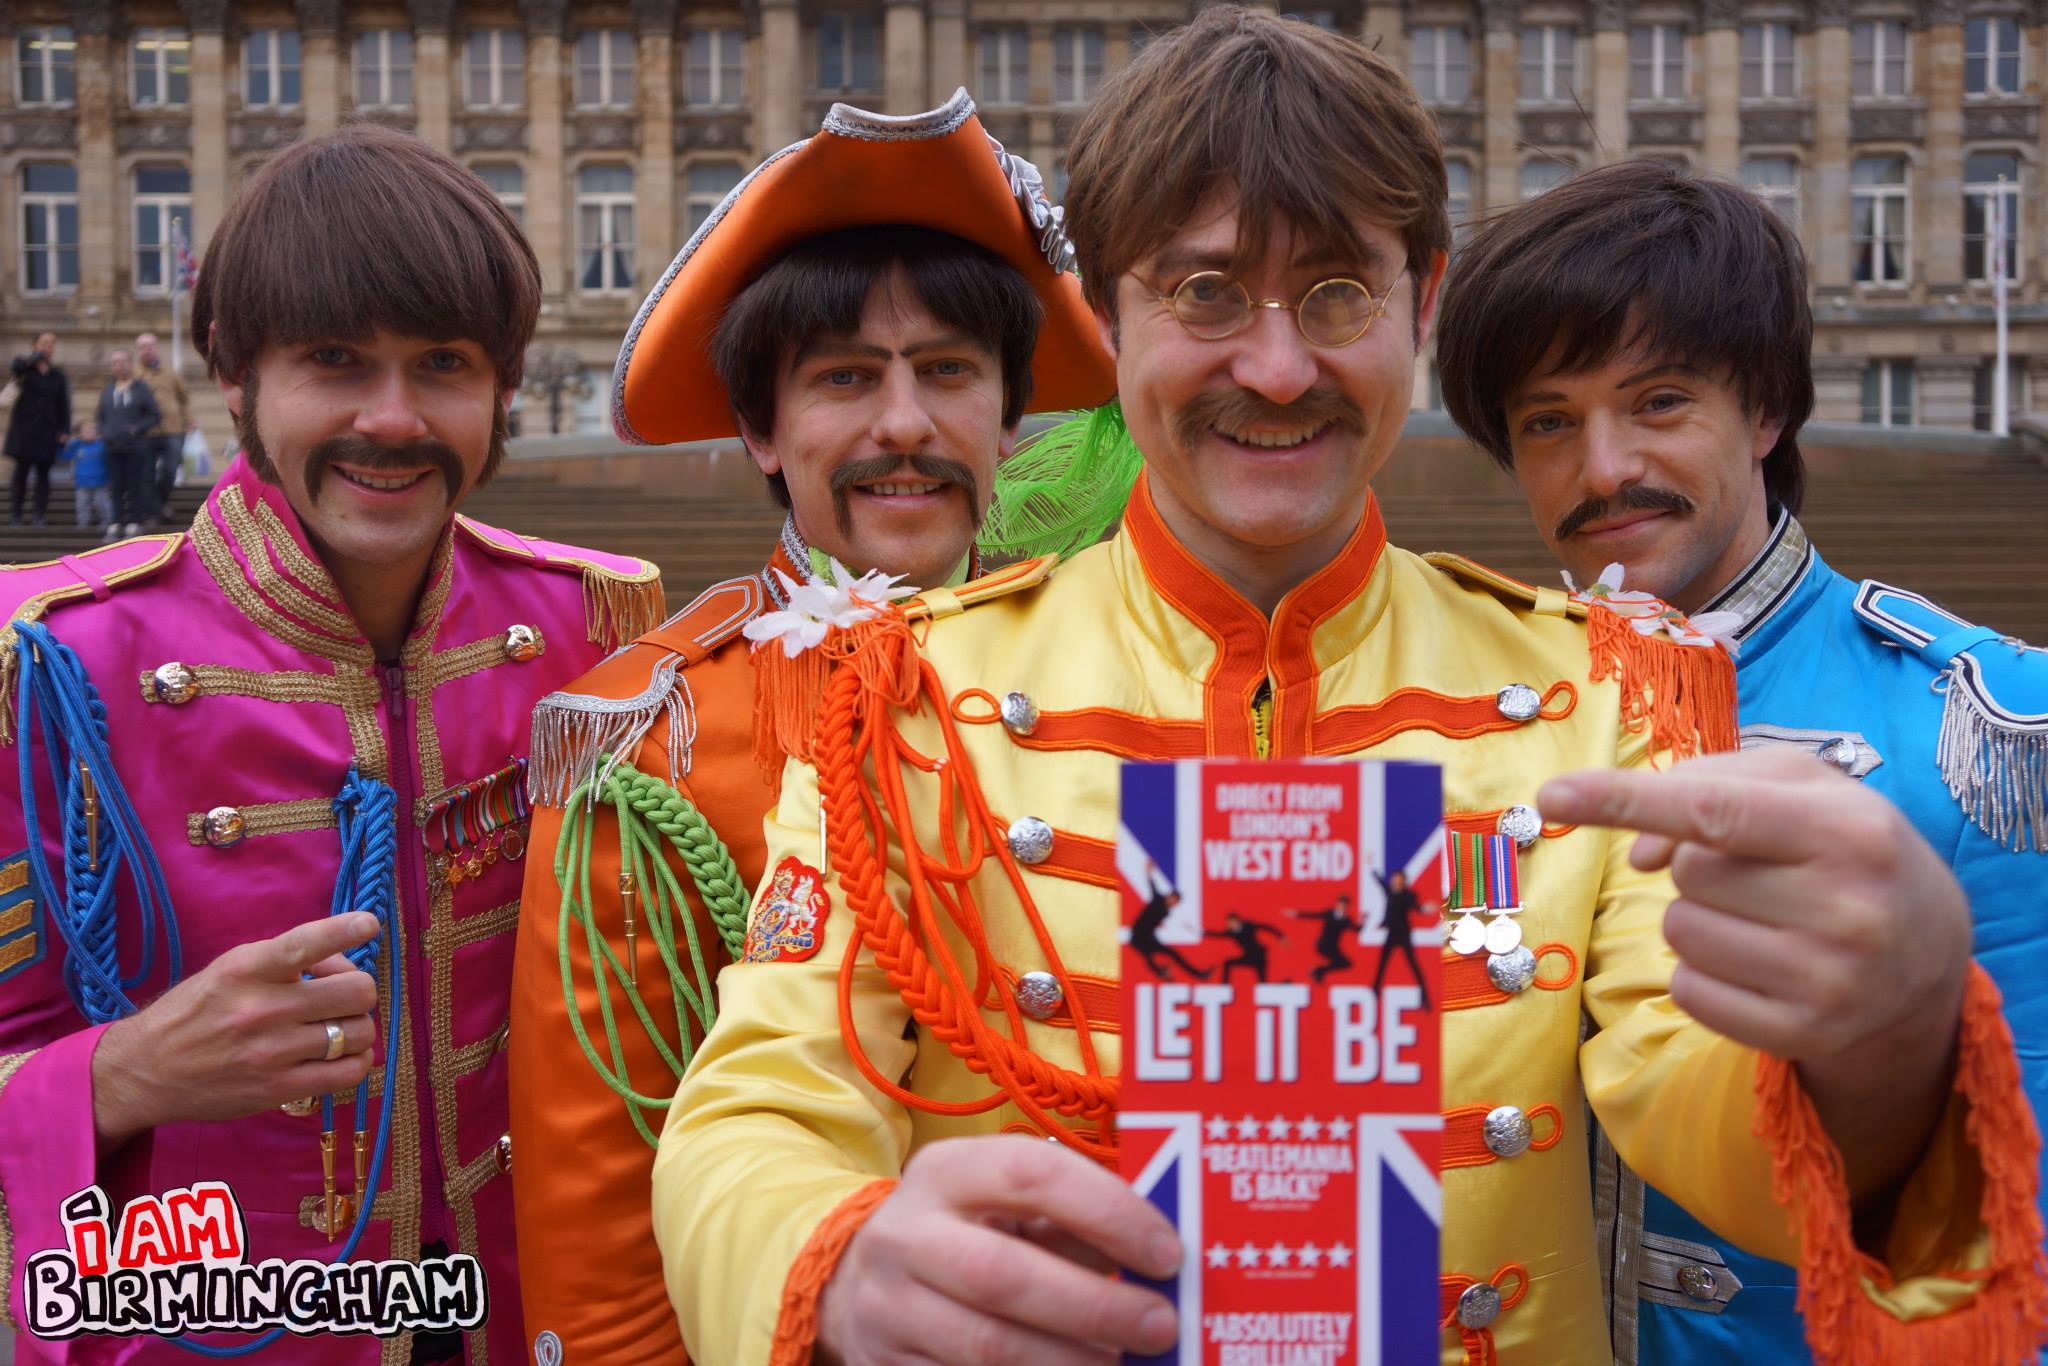 Hit West End Beatles musical 'Let It Be' is coming to the Alexandra Theatre in Birmingham